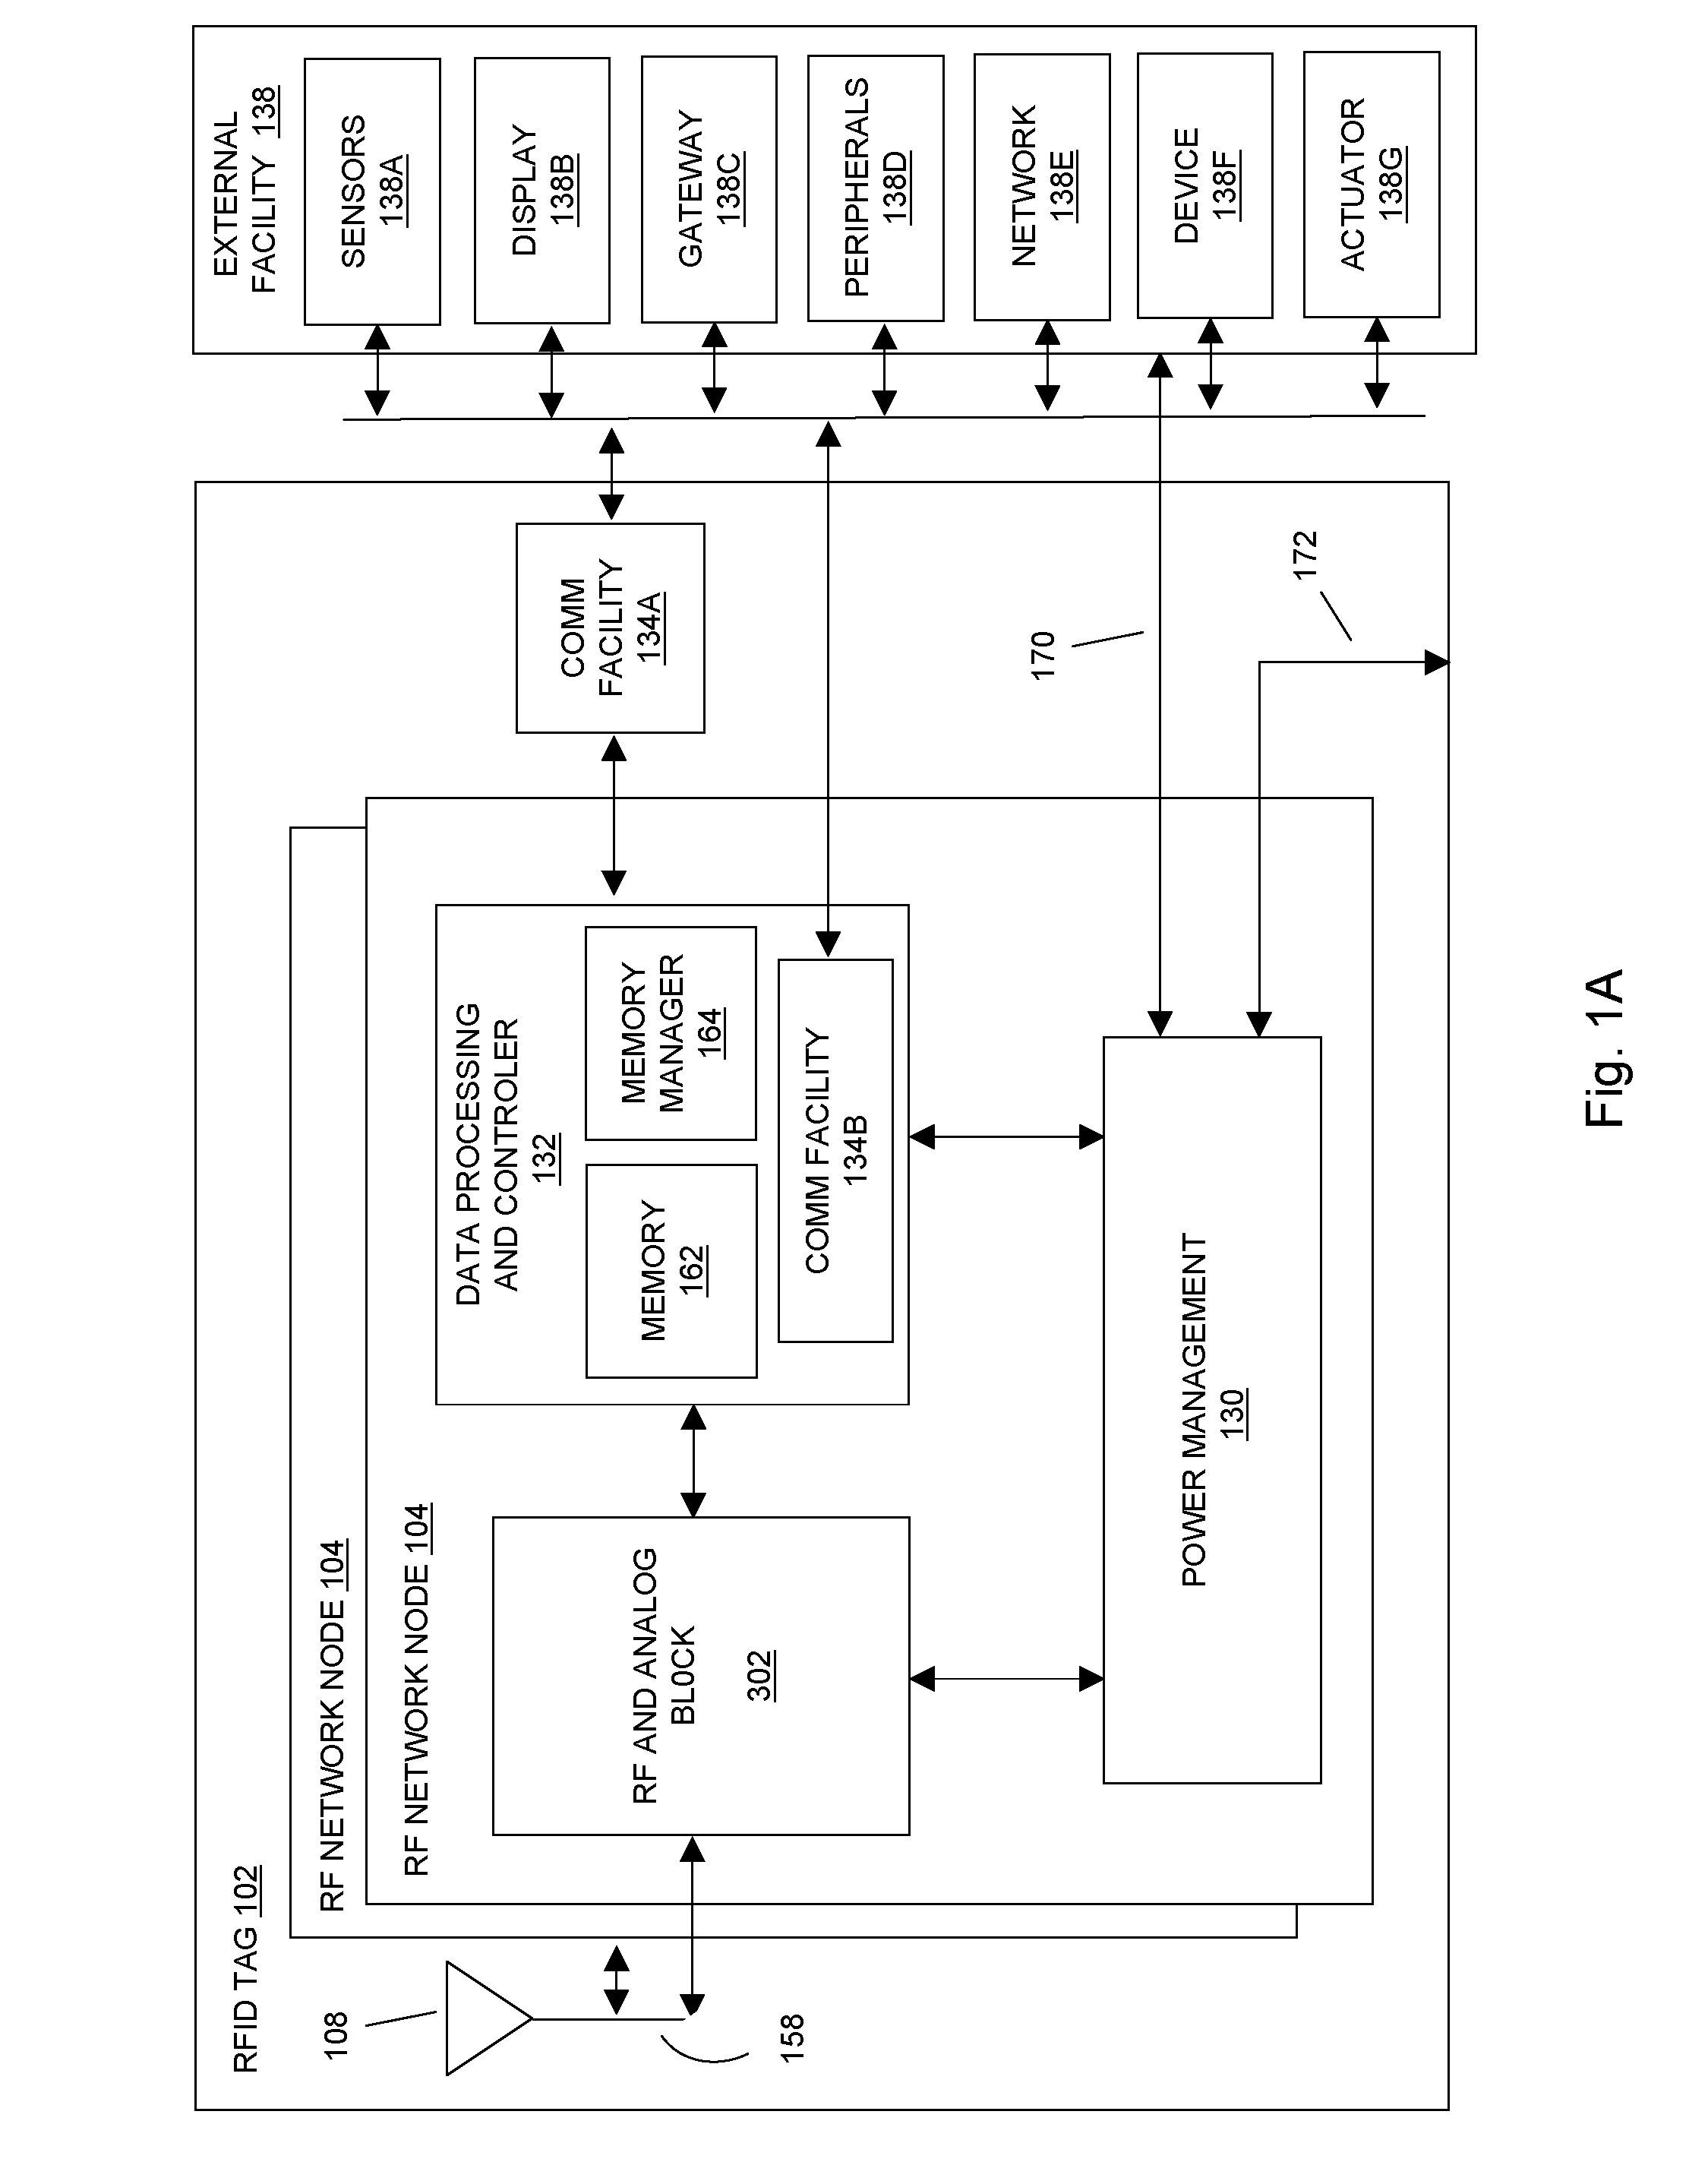 RFID tag facility with access to external devices